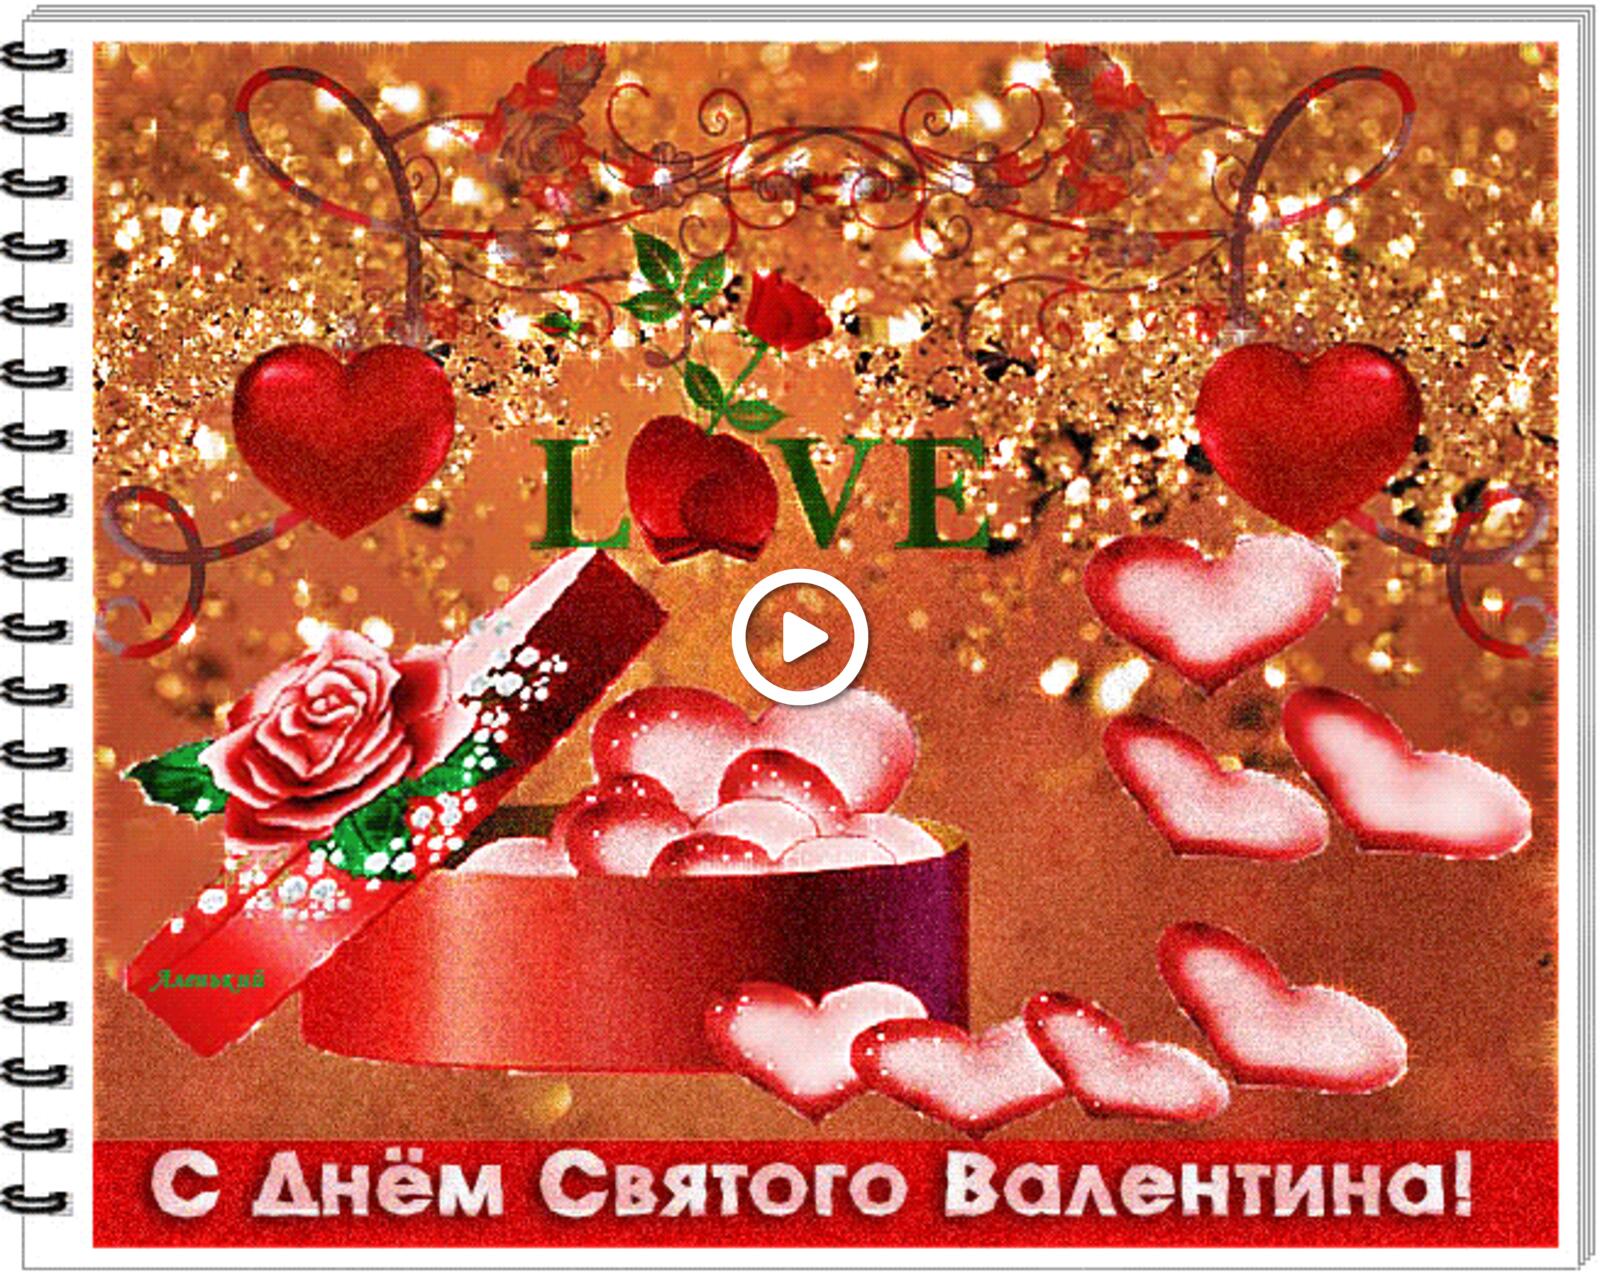 A postcard on the subject of hearts holidays valentine`s day with for free